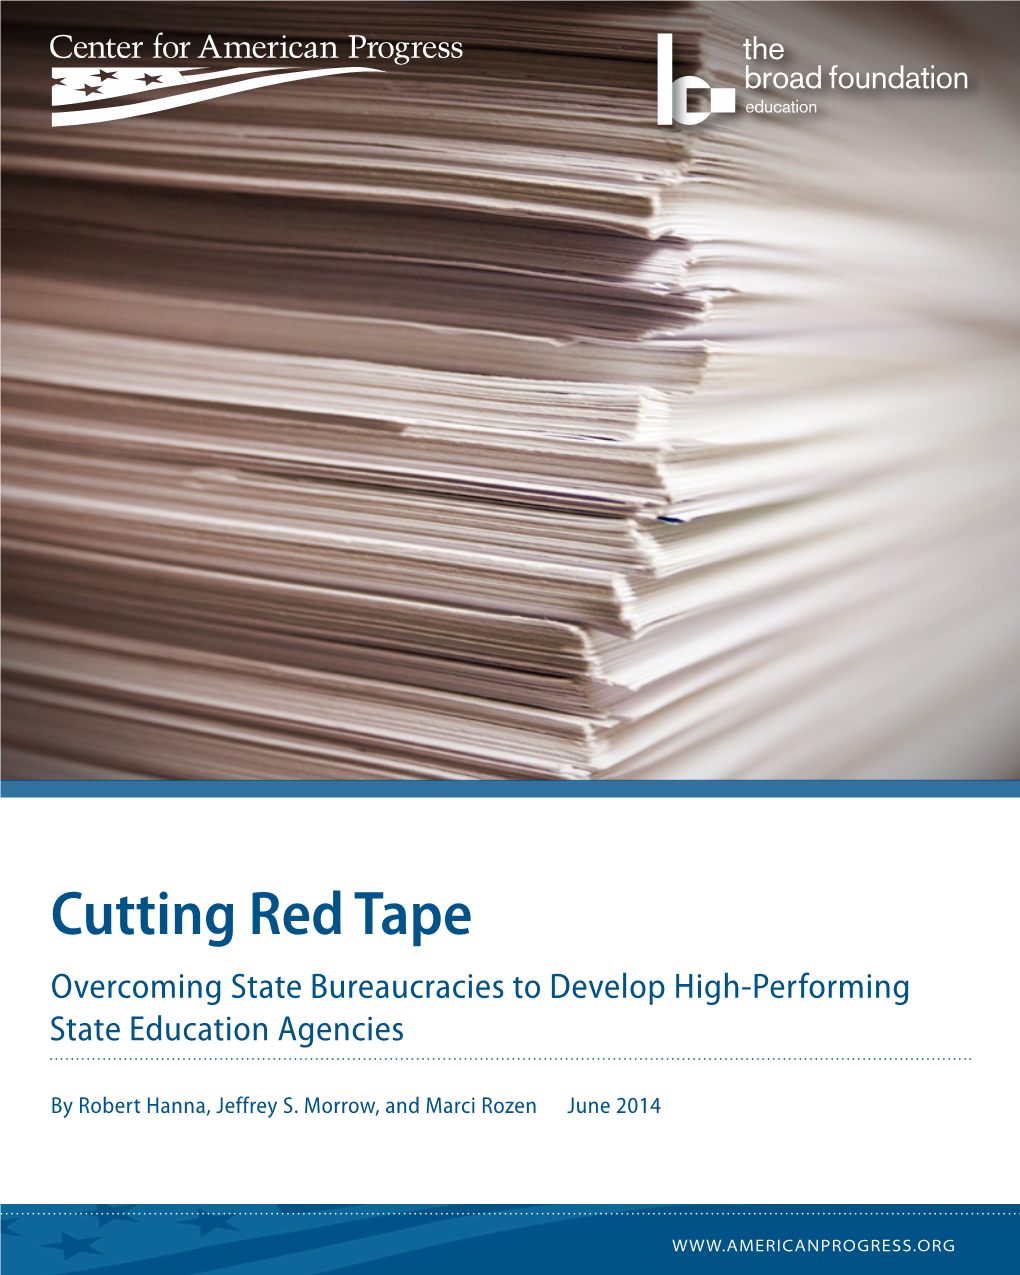 Cutting Red Tape Overcoming State Bureaucracies to Develop High-Performing State Education Agencies